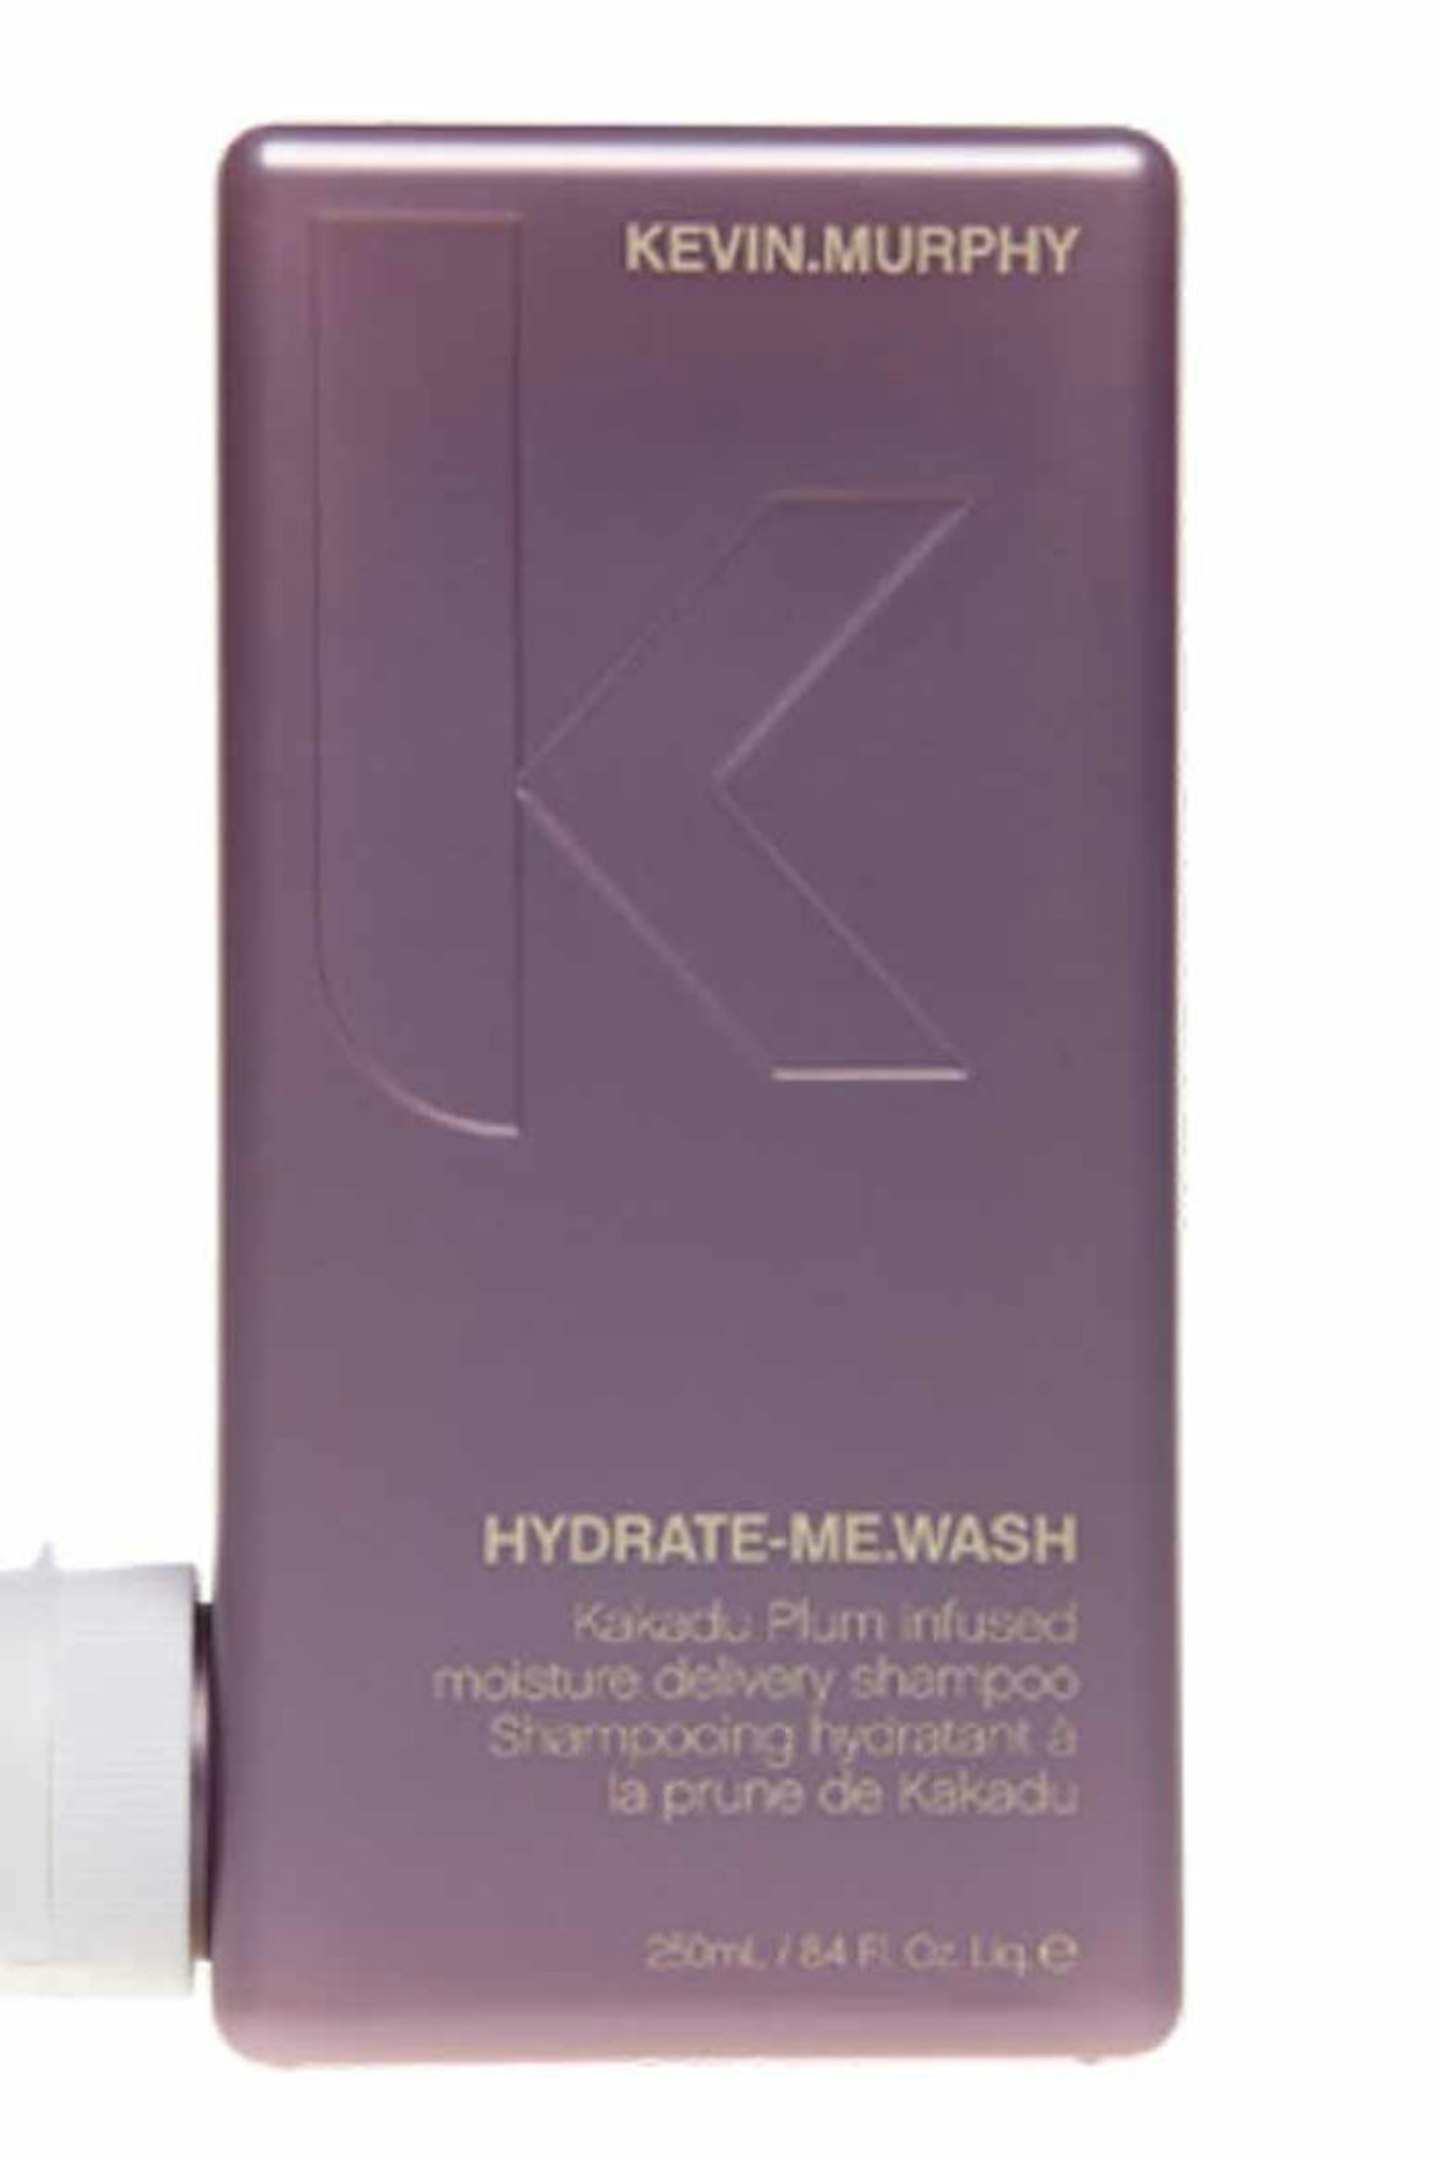 5. Kevin Murphy HYDRATE.ME.WASH, £18